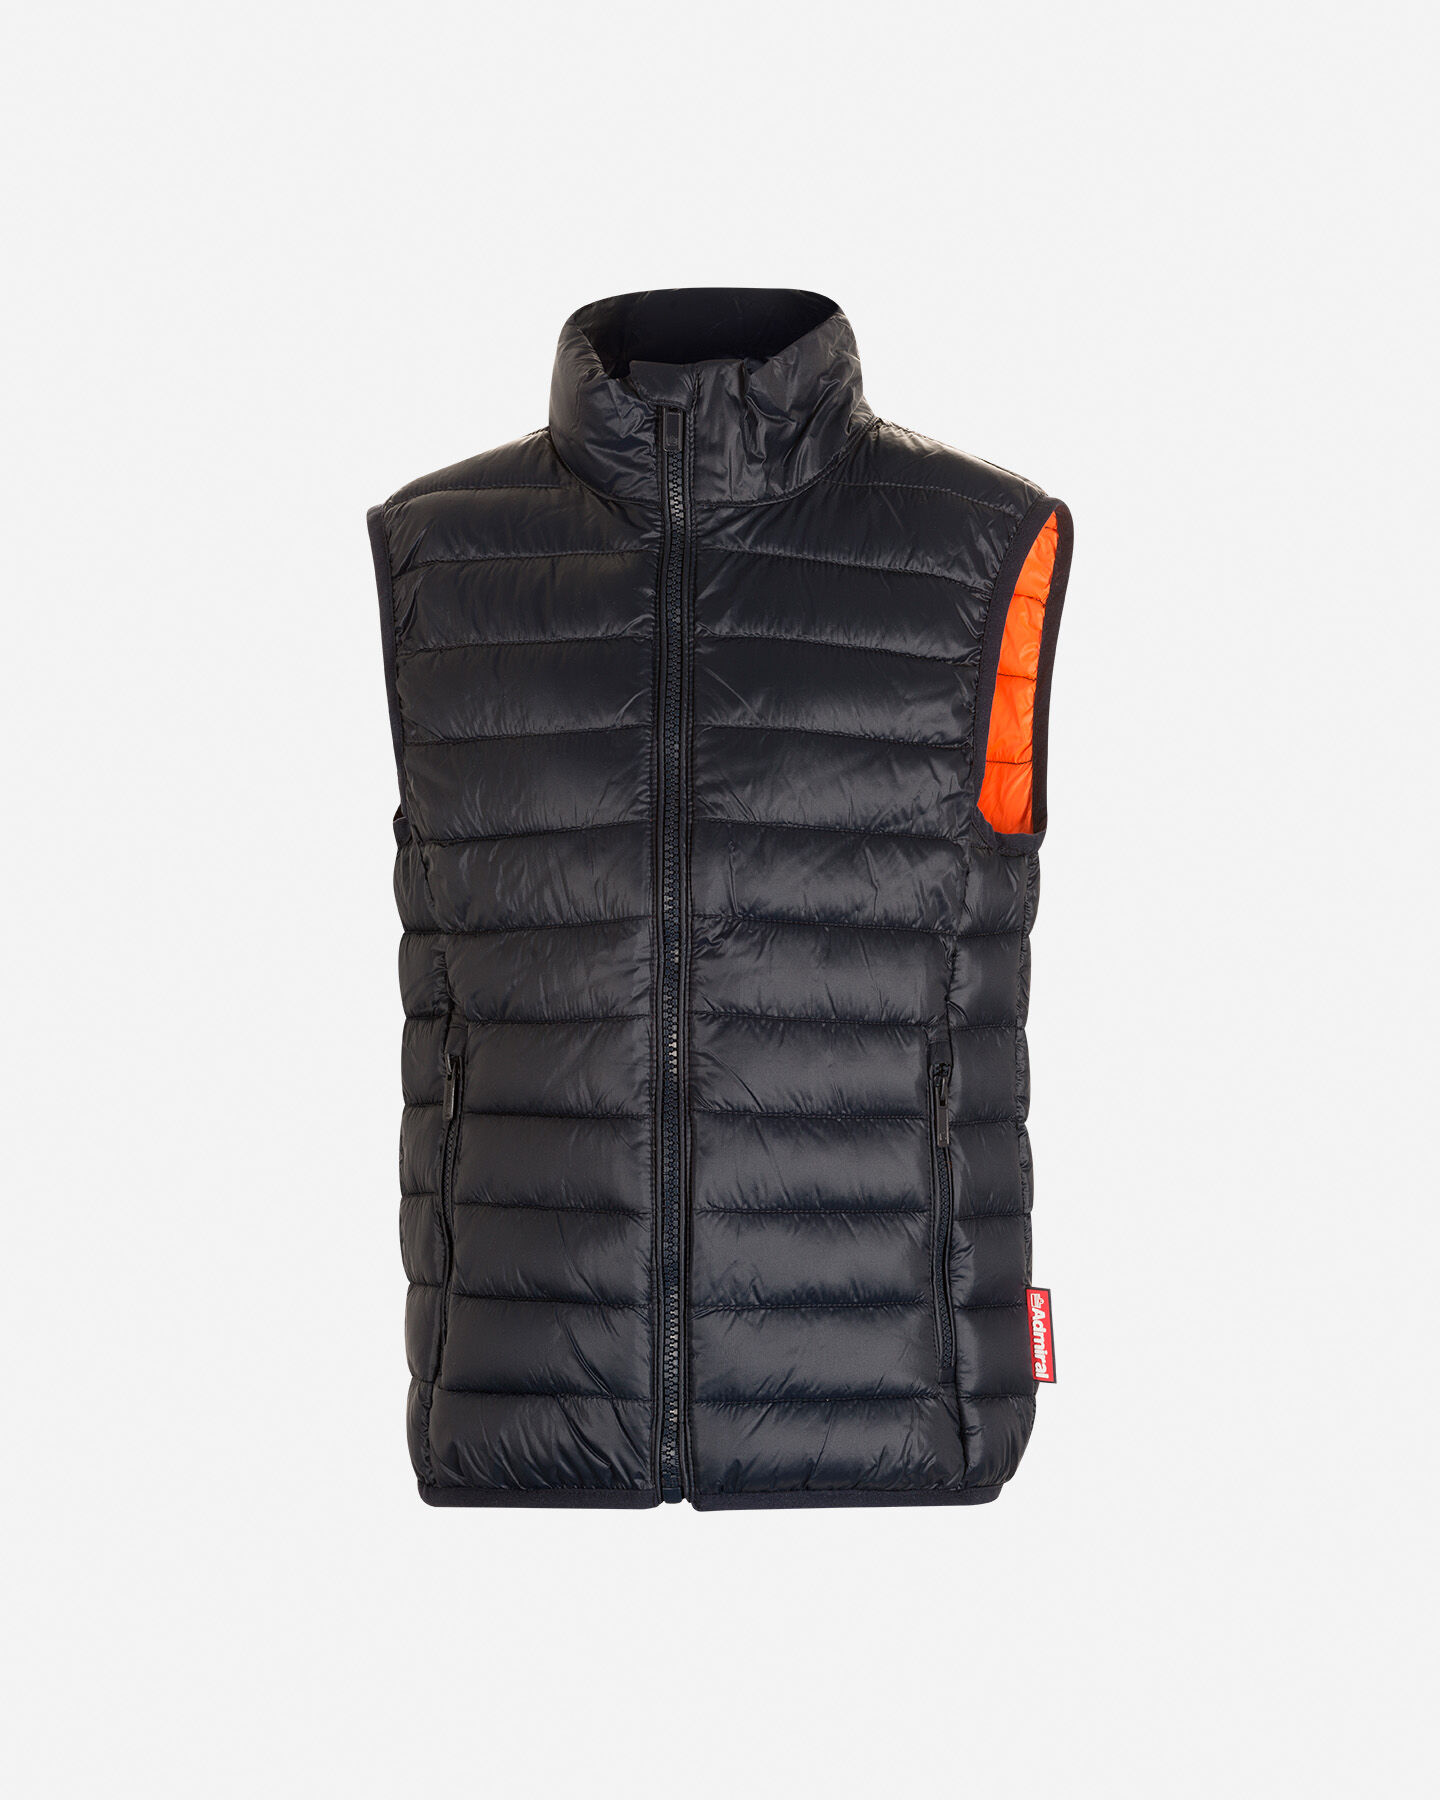  Gilet ADMIRAL LIFESTYLE JR S4101326|914|4A scatto 0